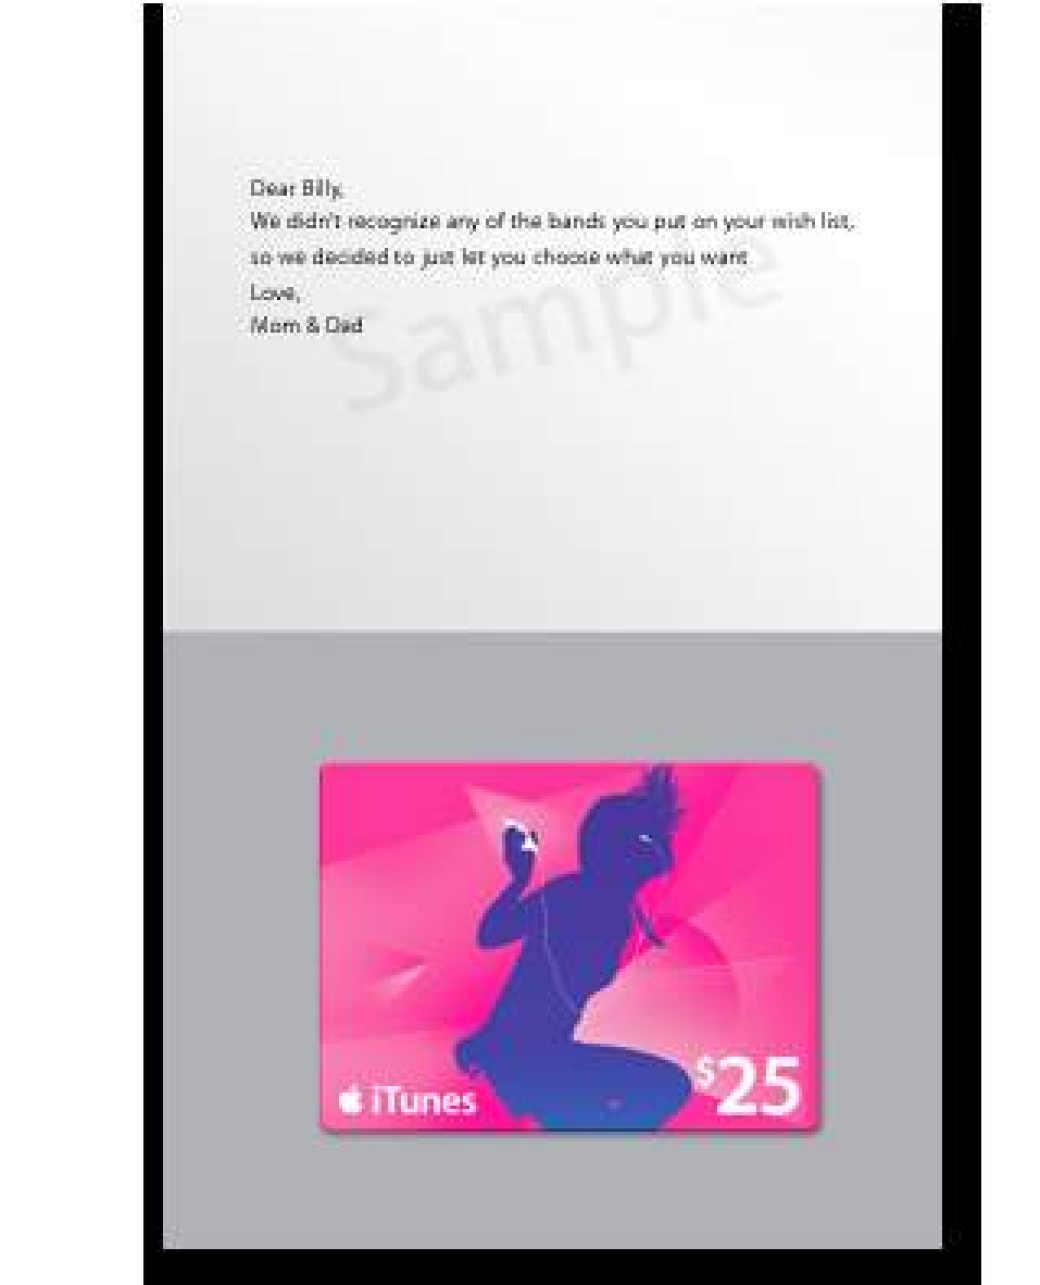 Fake iTunes cards challenge Apple's iTunes business